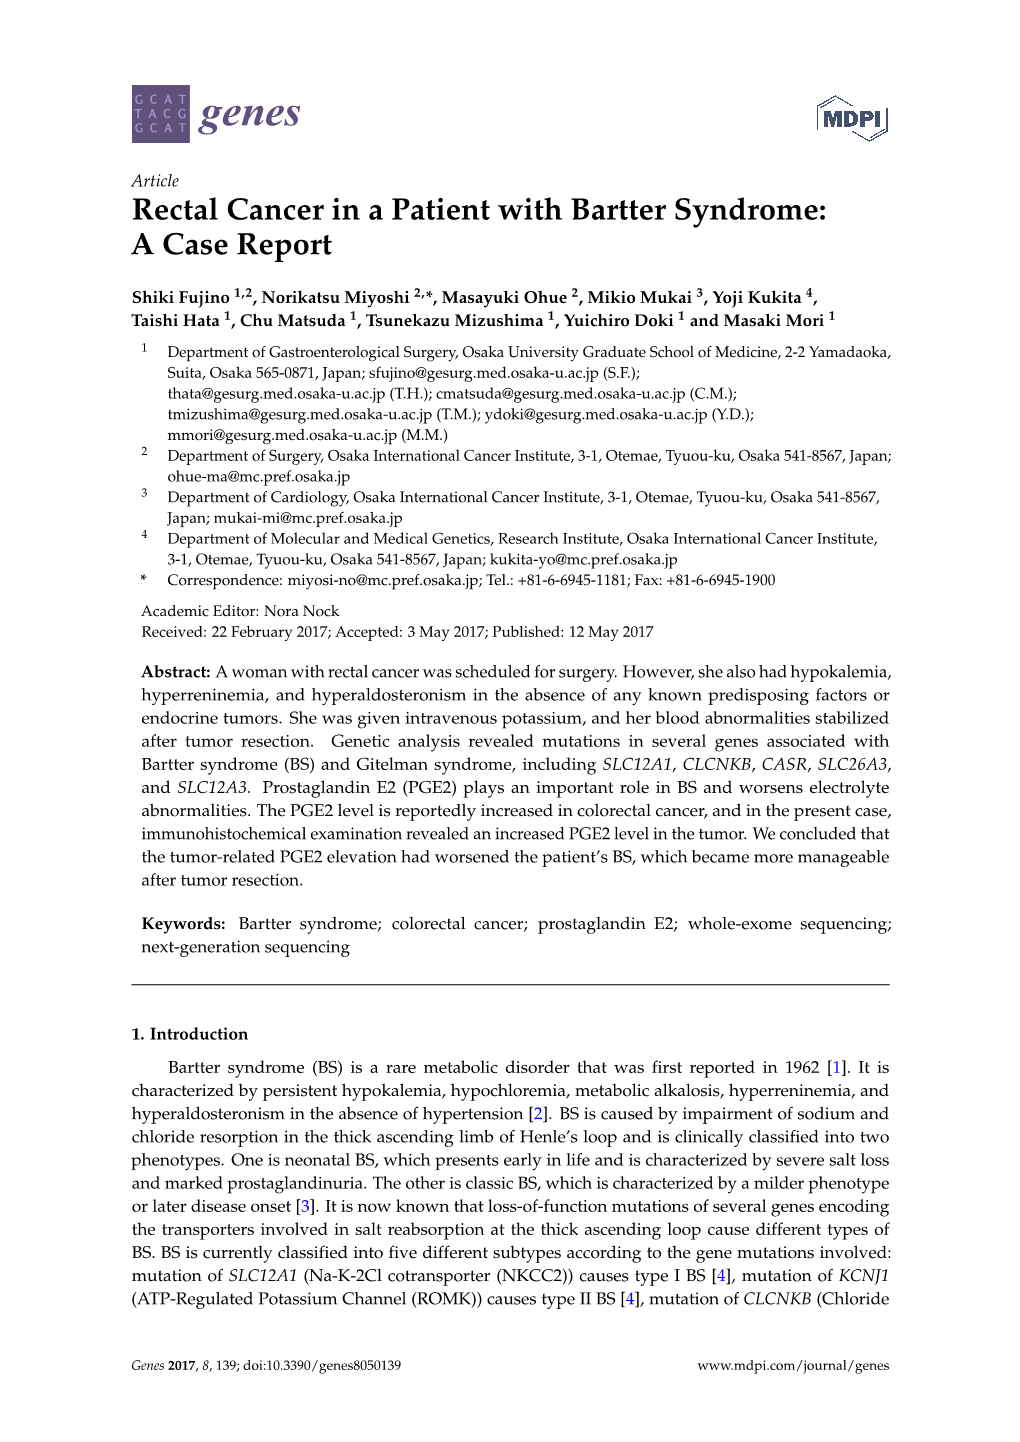 Rectal Cancer in a Patient with Bartter Syndrome: a Case Report